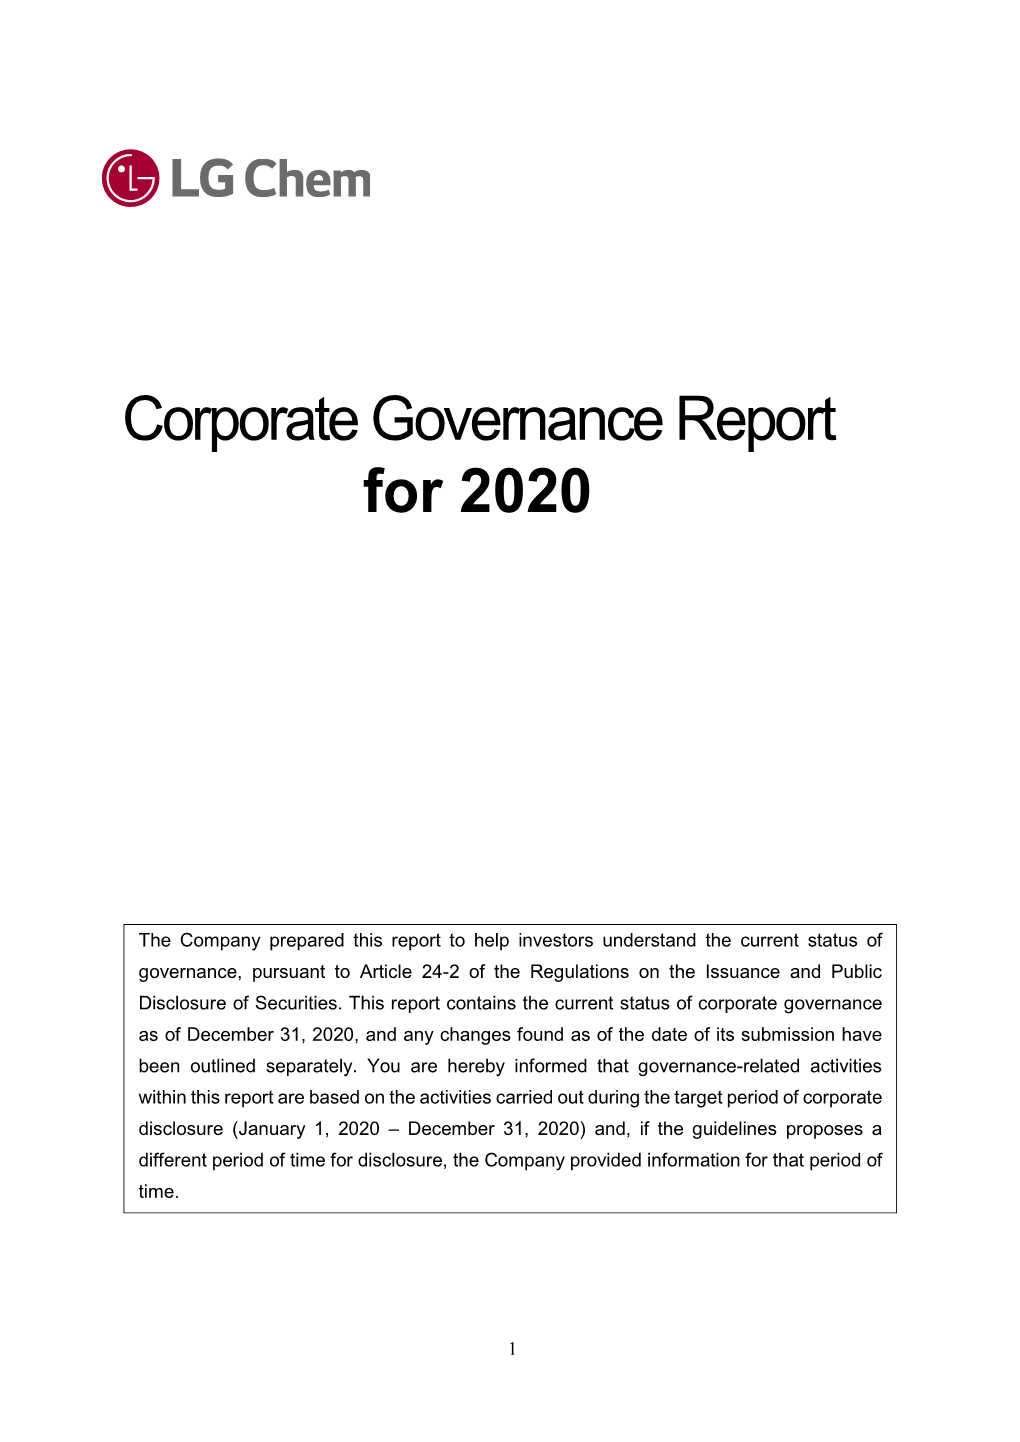 Corporate Governance Report for 2020